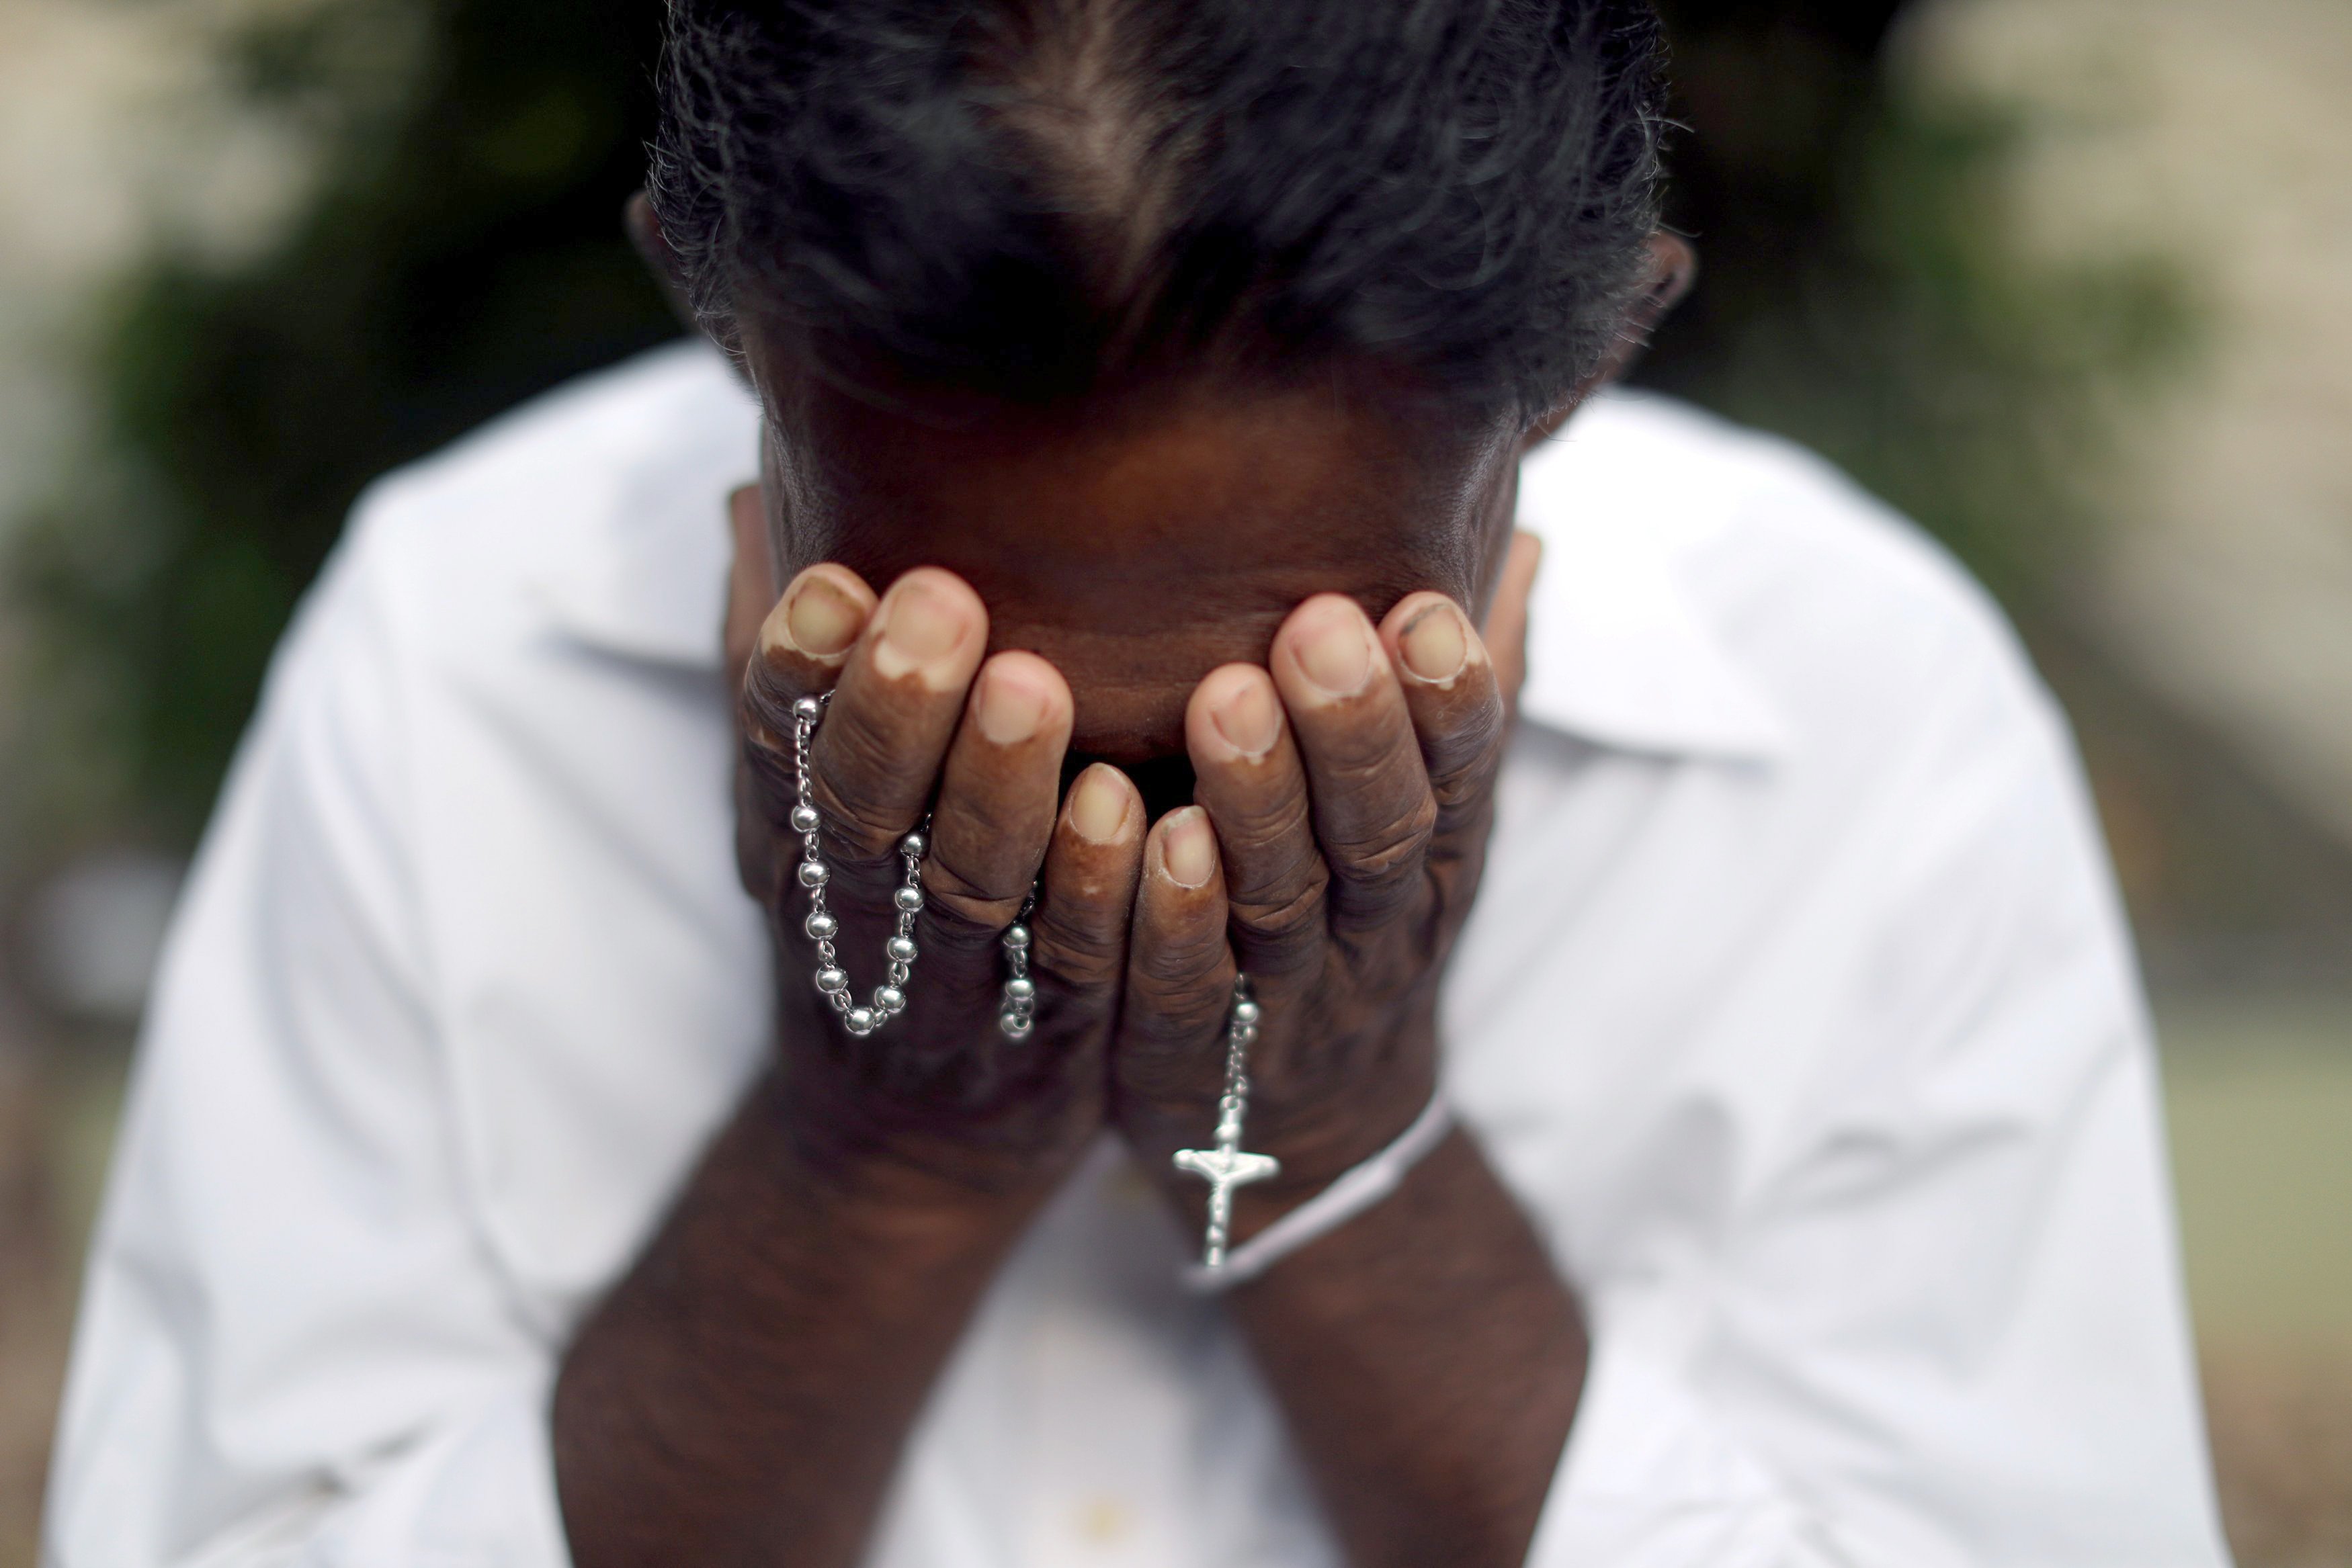 A person mourns near the grave of a suicide bombing victim at Sellakanda Catholic cemetery April 23, 2019, in Negombo, Sri Lanka. (CNS/Reuters/Athit Perawongmetha)